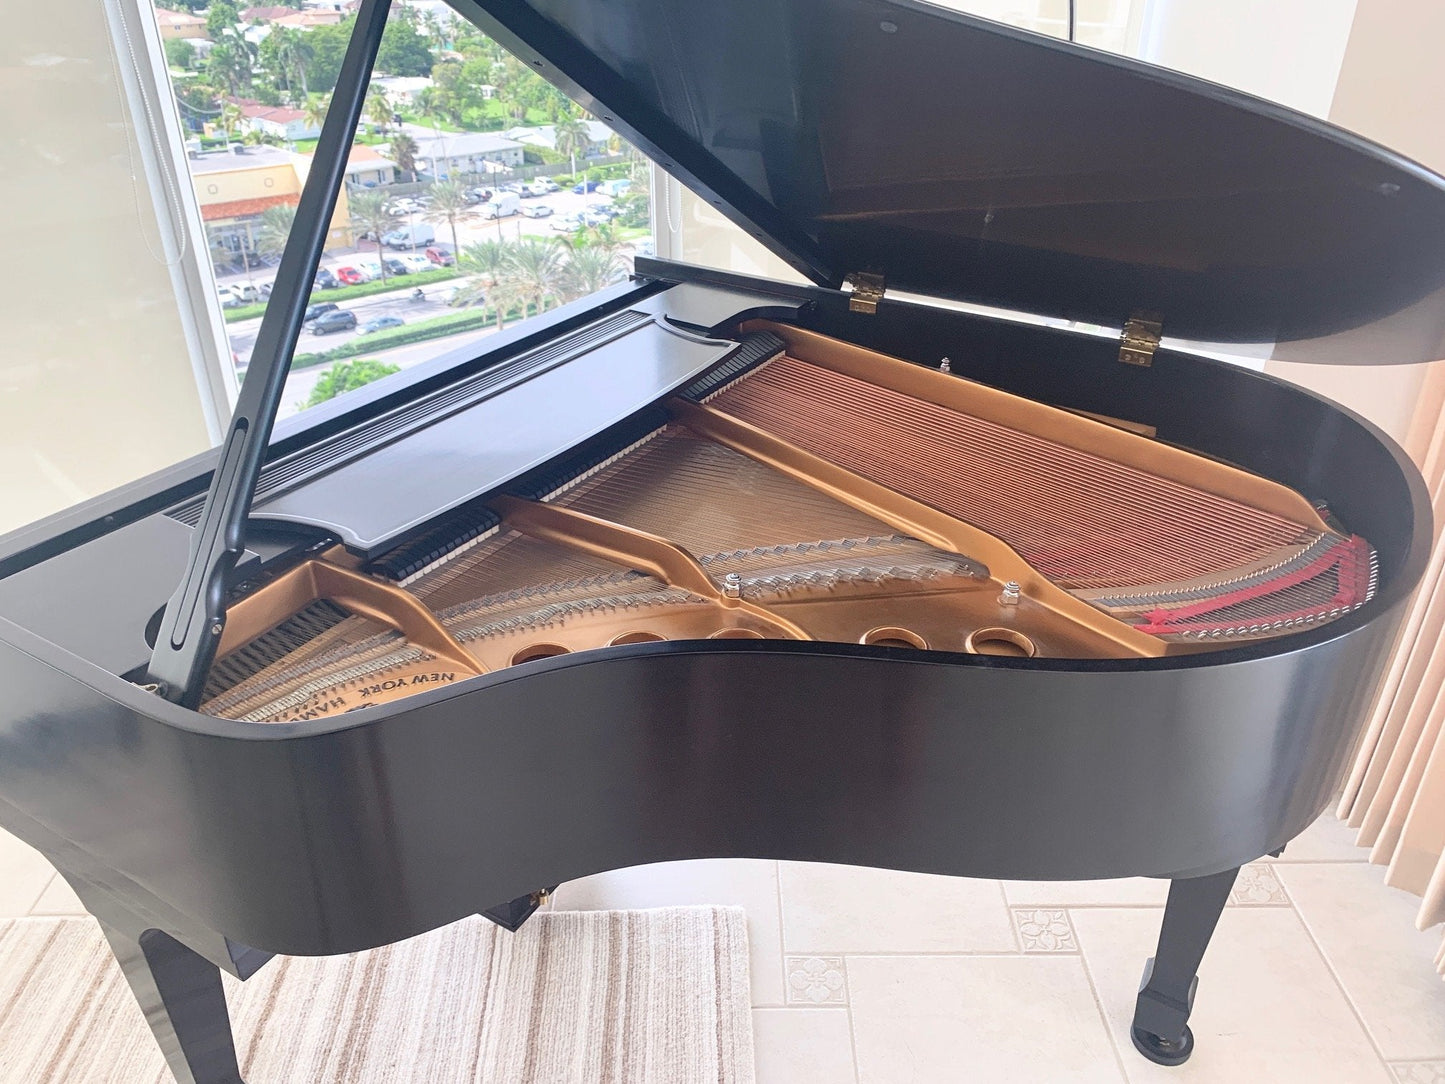 Steinway Model S Piano Purchased New in 2006